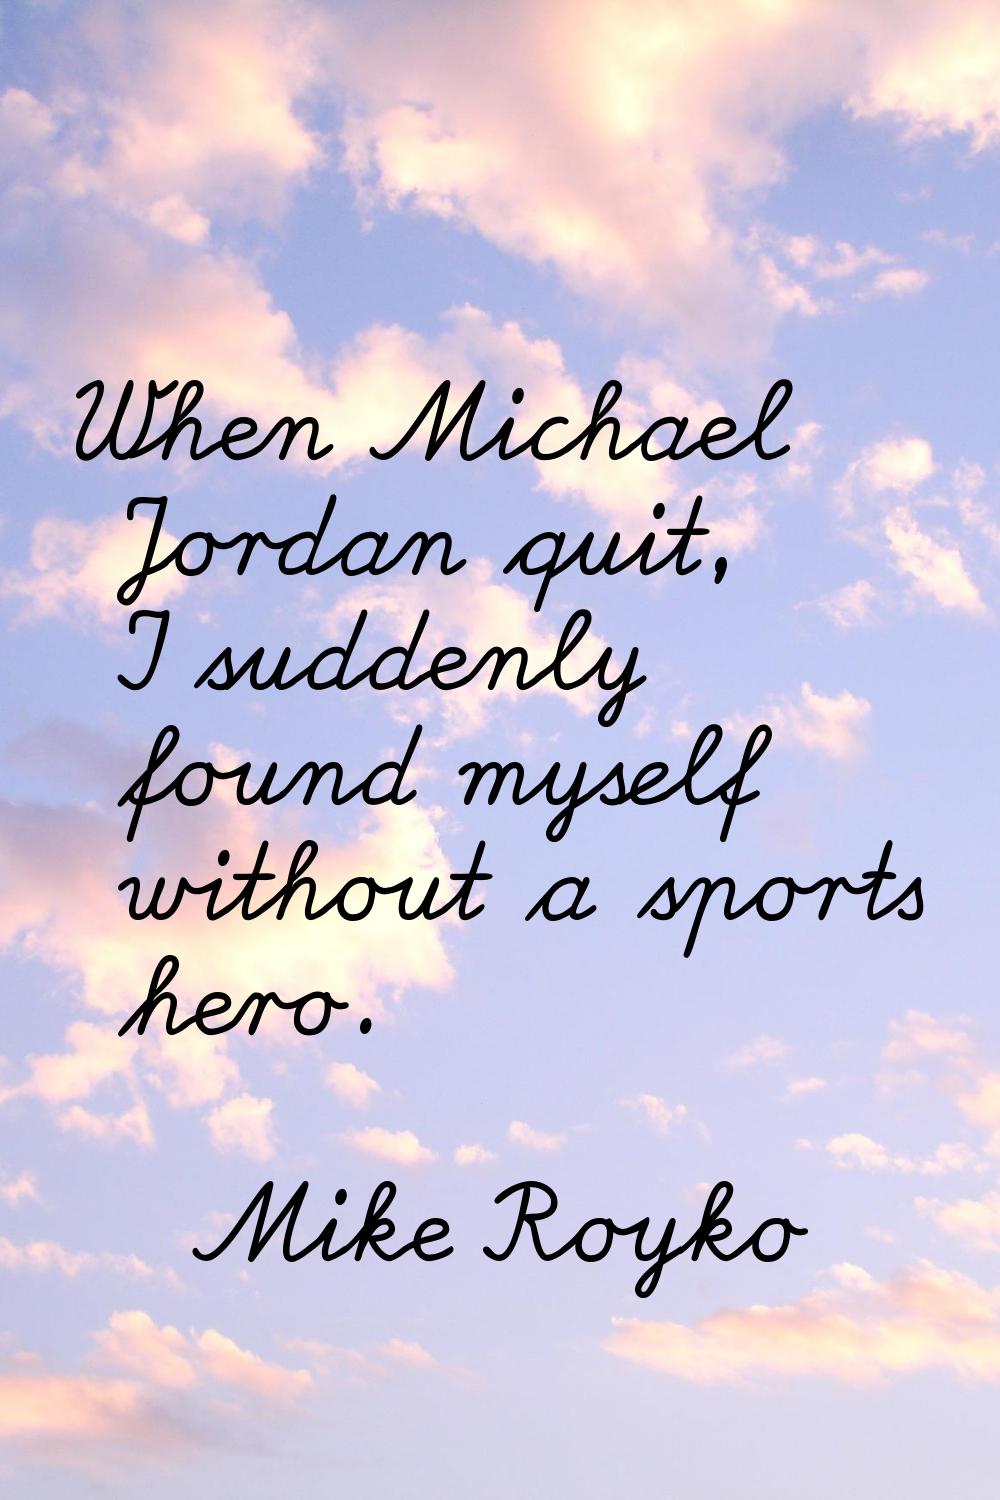 When Michael Jordan quit, I suddenly found myself without a sports hero.